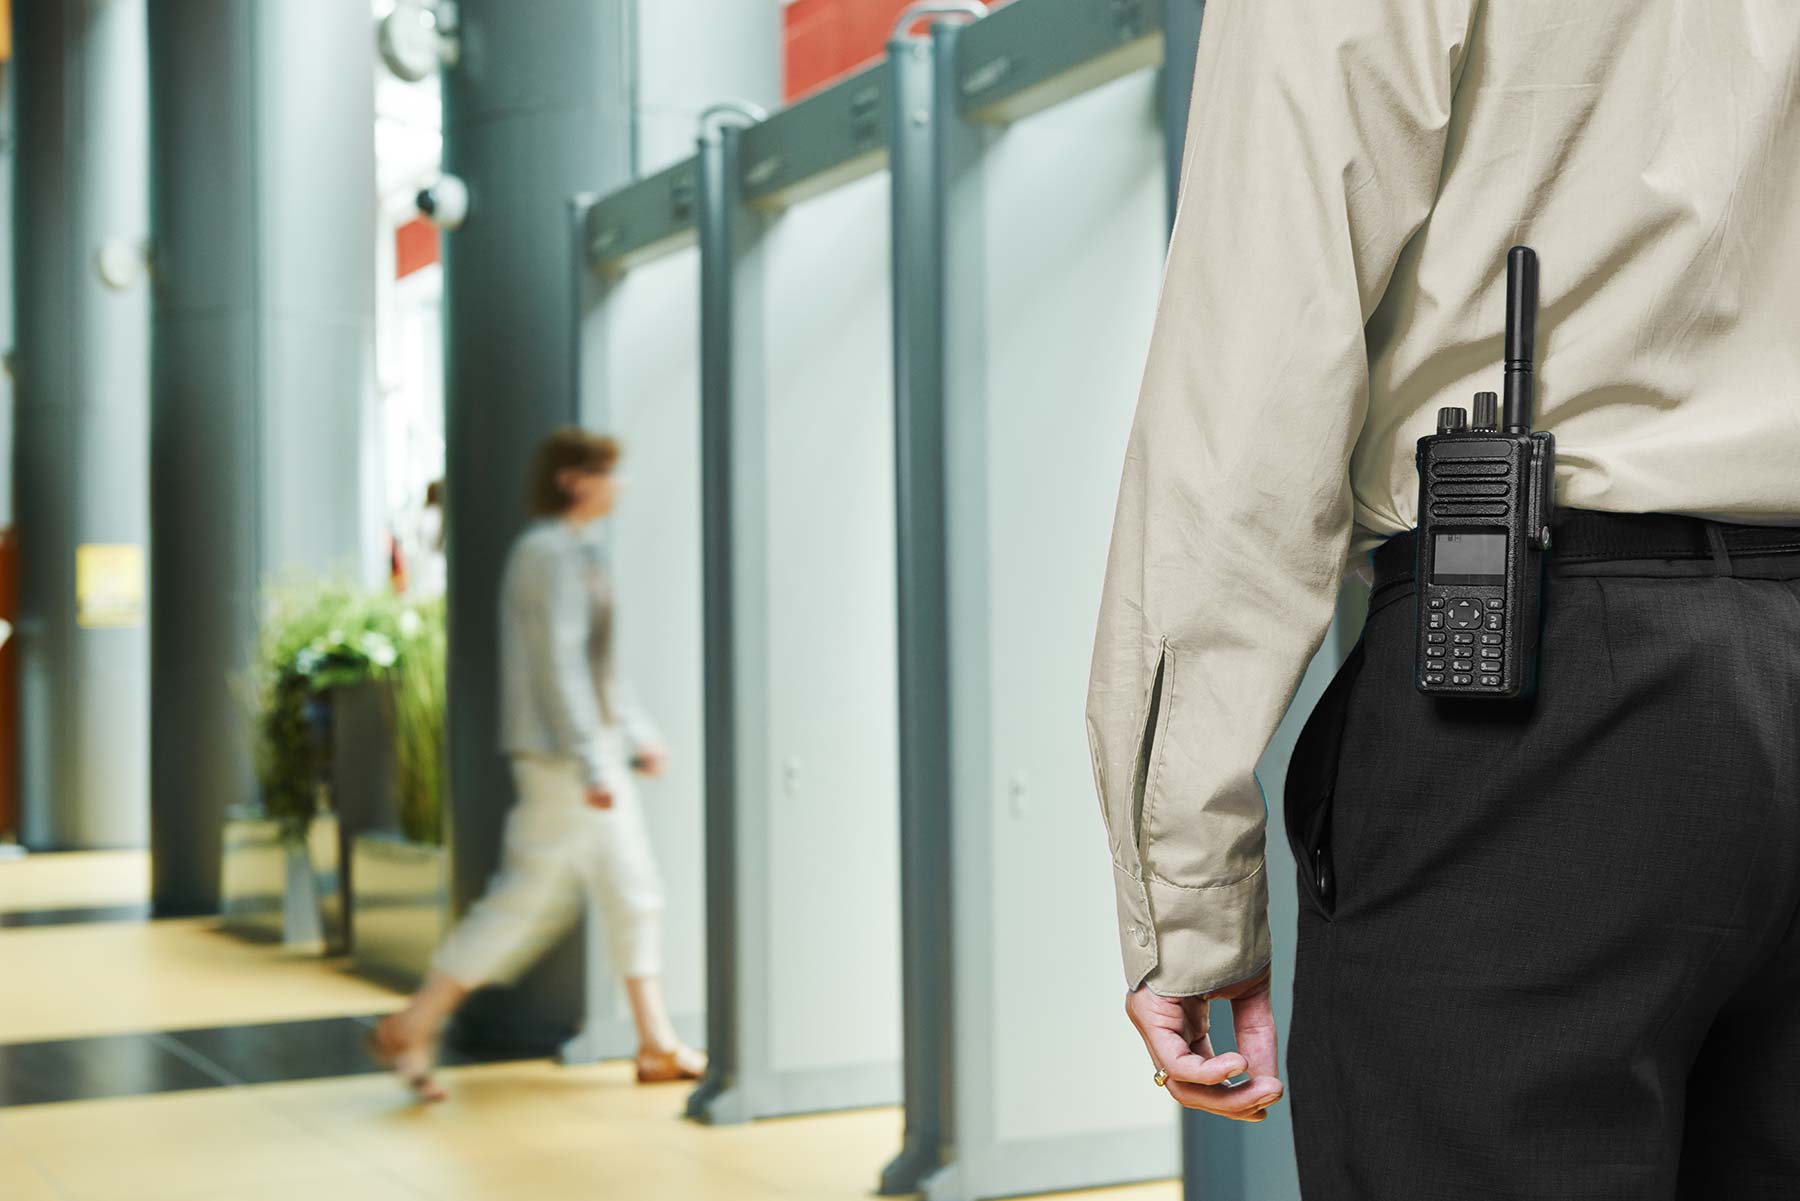 Commercial Security Real Estate Commercial Security Safety Services proudly serving Arizona Illinois and Indiana areas | Best Security Around for our Commercial Clients | Commercial Services and Commercial Companies Serving Commercial Clients | Commercial properties and Commercial clients | Tempe Gilbert Tucson Glendale Mesa Goodyear Surprise Scottsdale Chandler Phoenix AZ Romeoville Elwood Rosemont Schaumburg Aurora Joliet Chicago Heights Bolingbrook Illinois Arizona Indiana